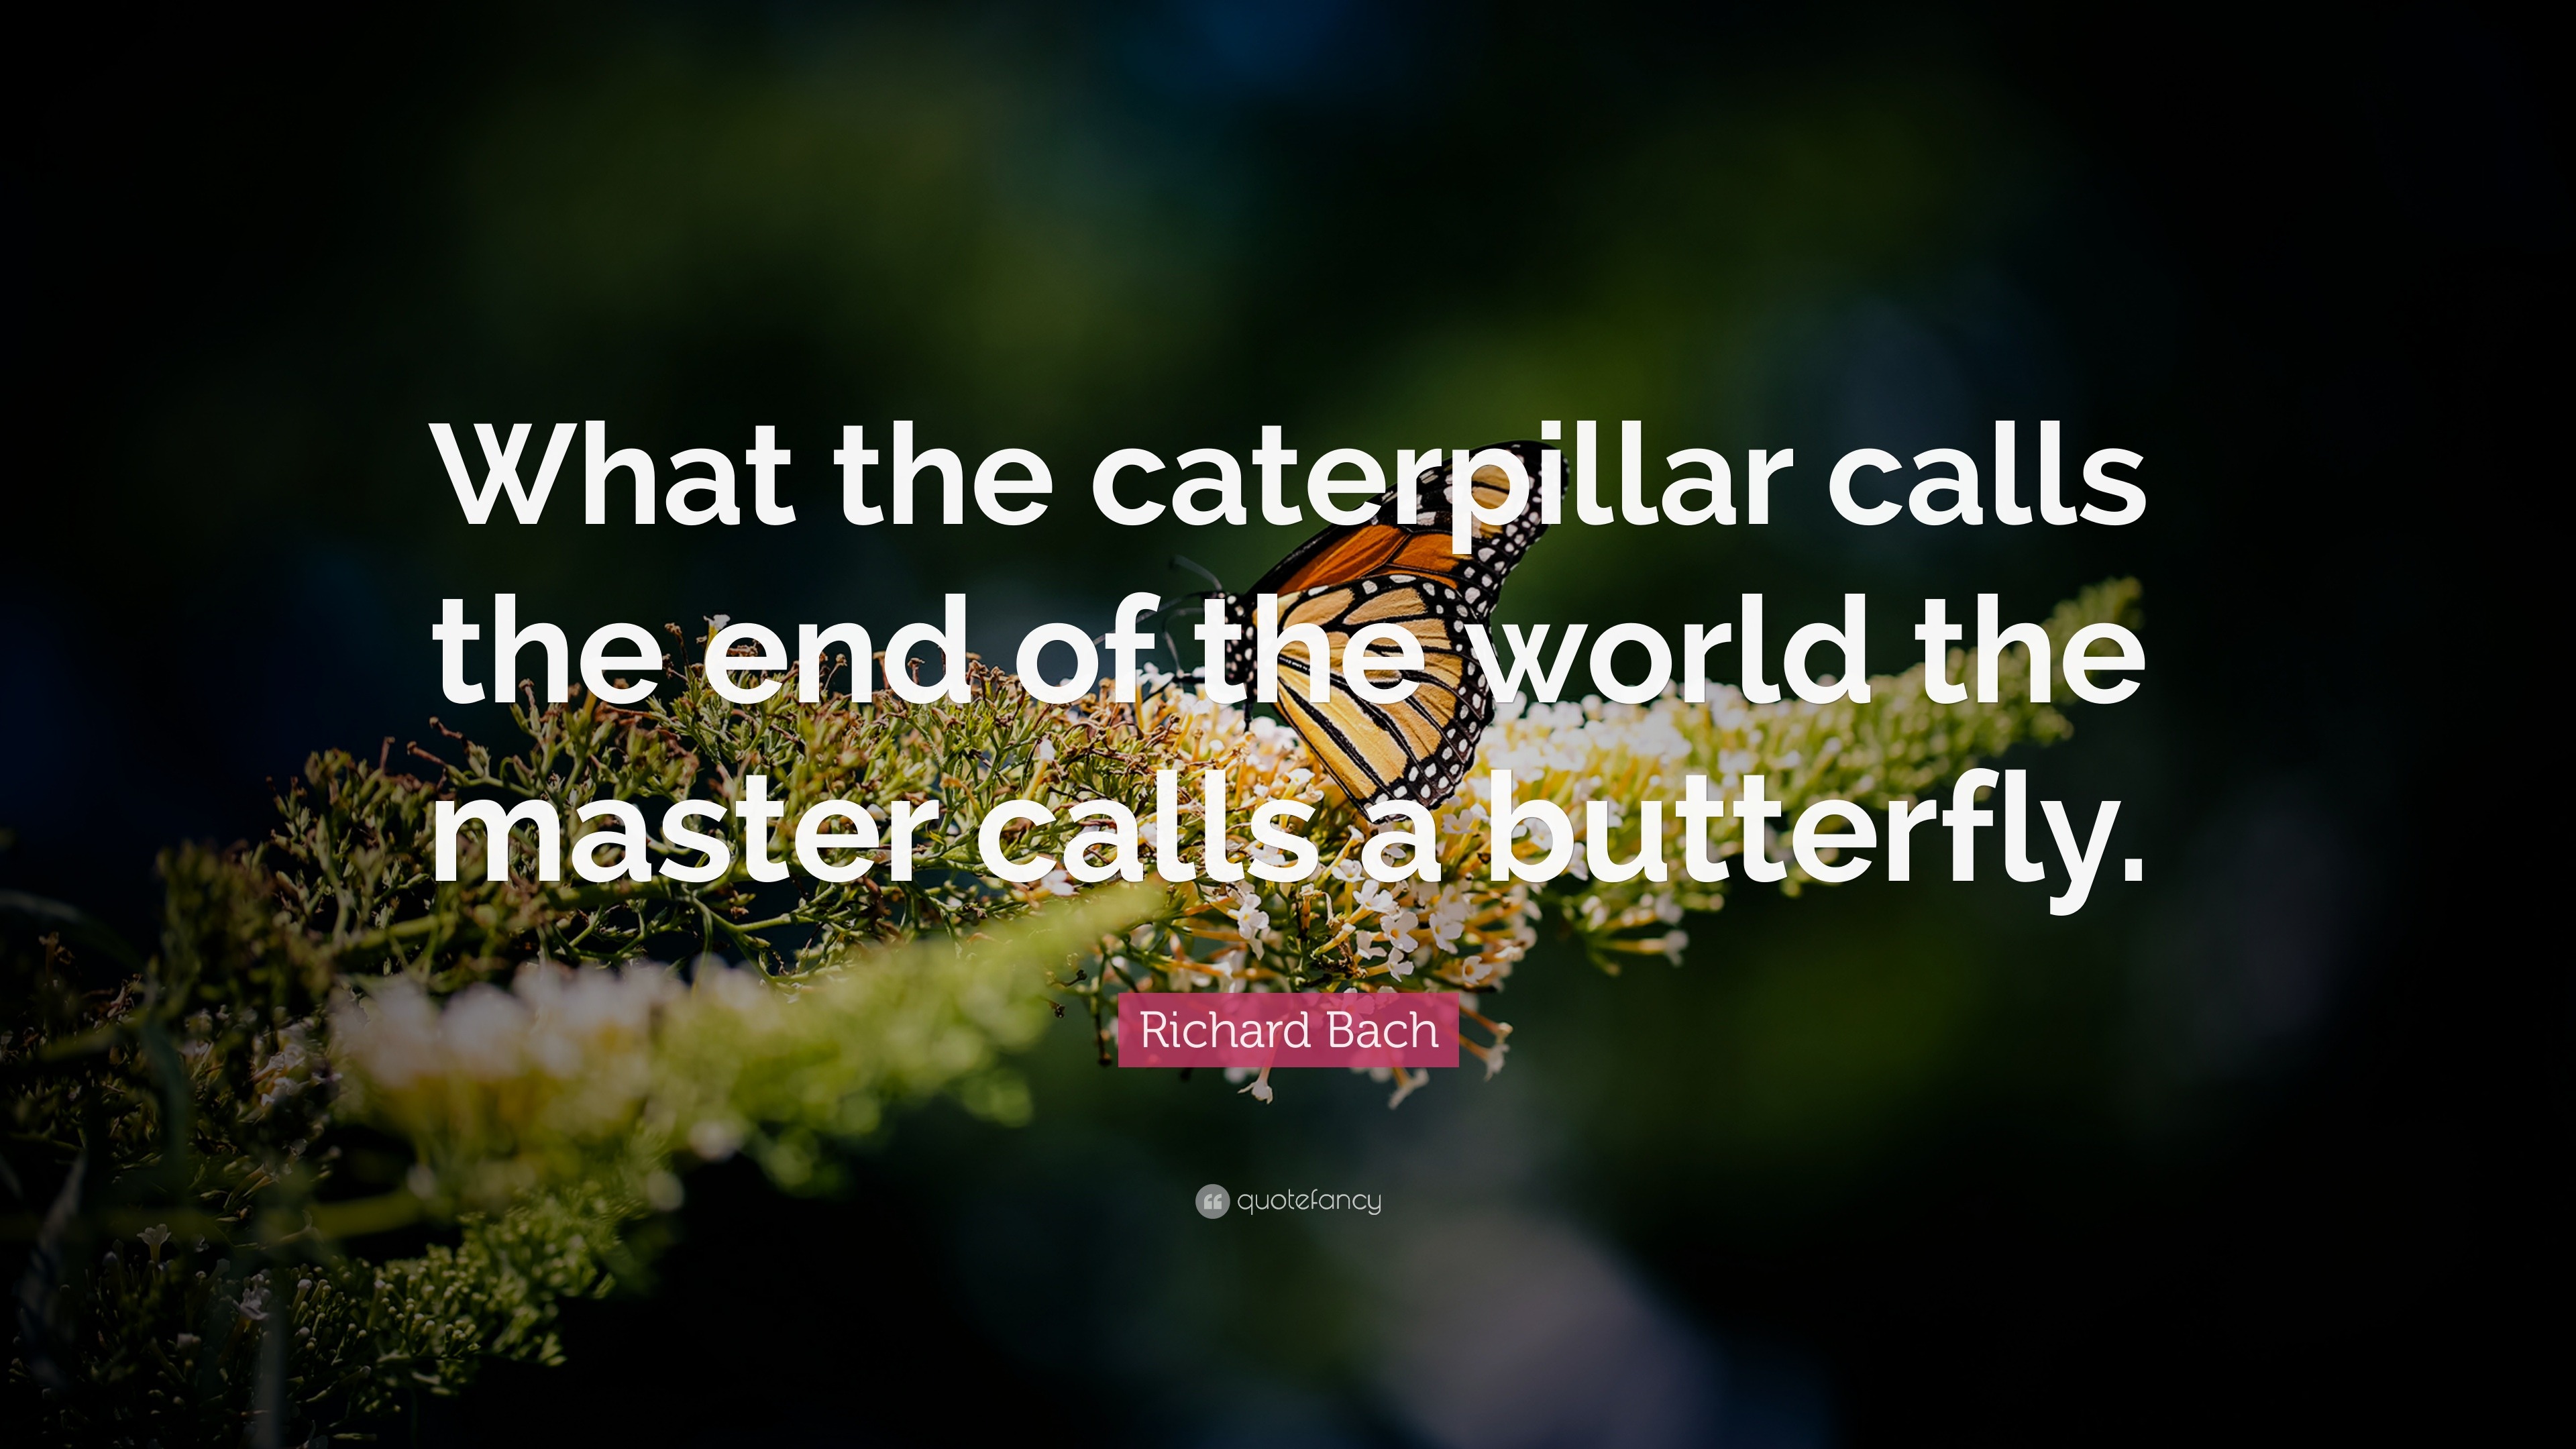 38561-Richard-Bach-Quote-What-the-caterpillar-calls-the-end-of-the-world.jpg